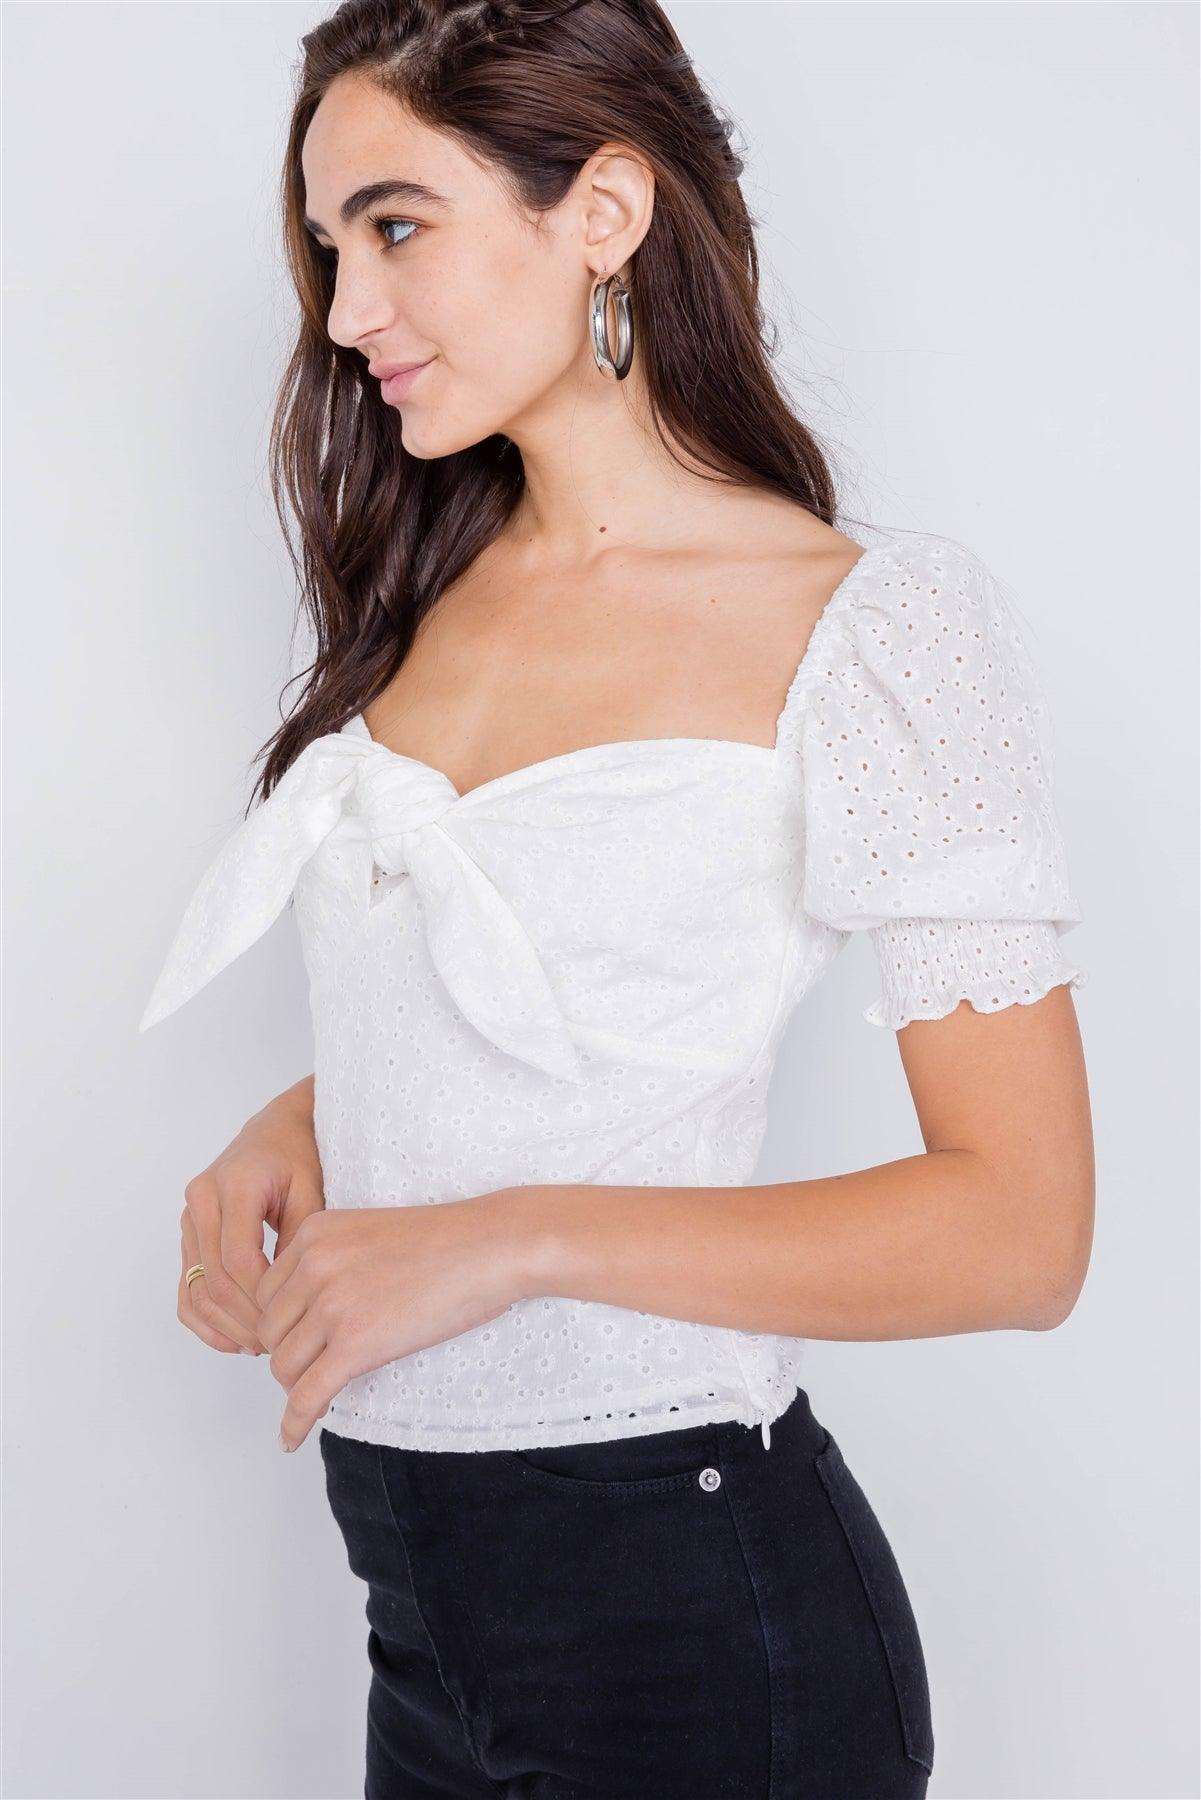 Off-White Floral Eyelet Office Chic Square Neck Front Bow Top /4-2-1